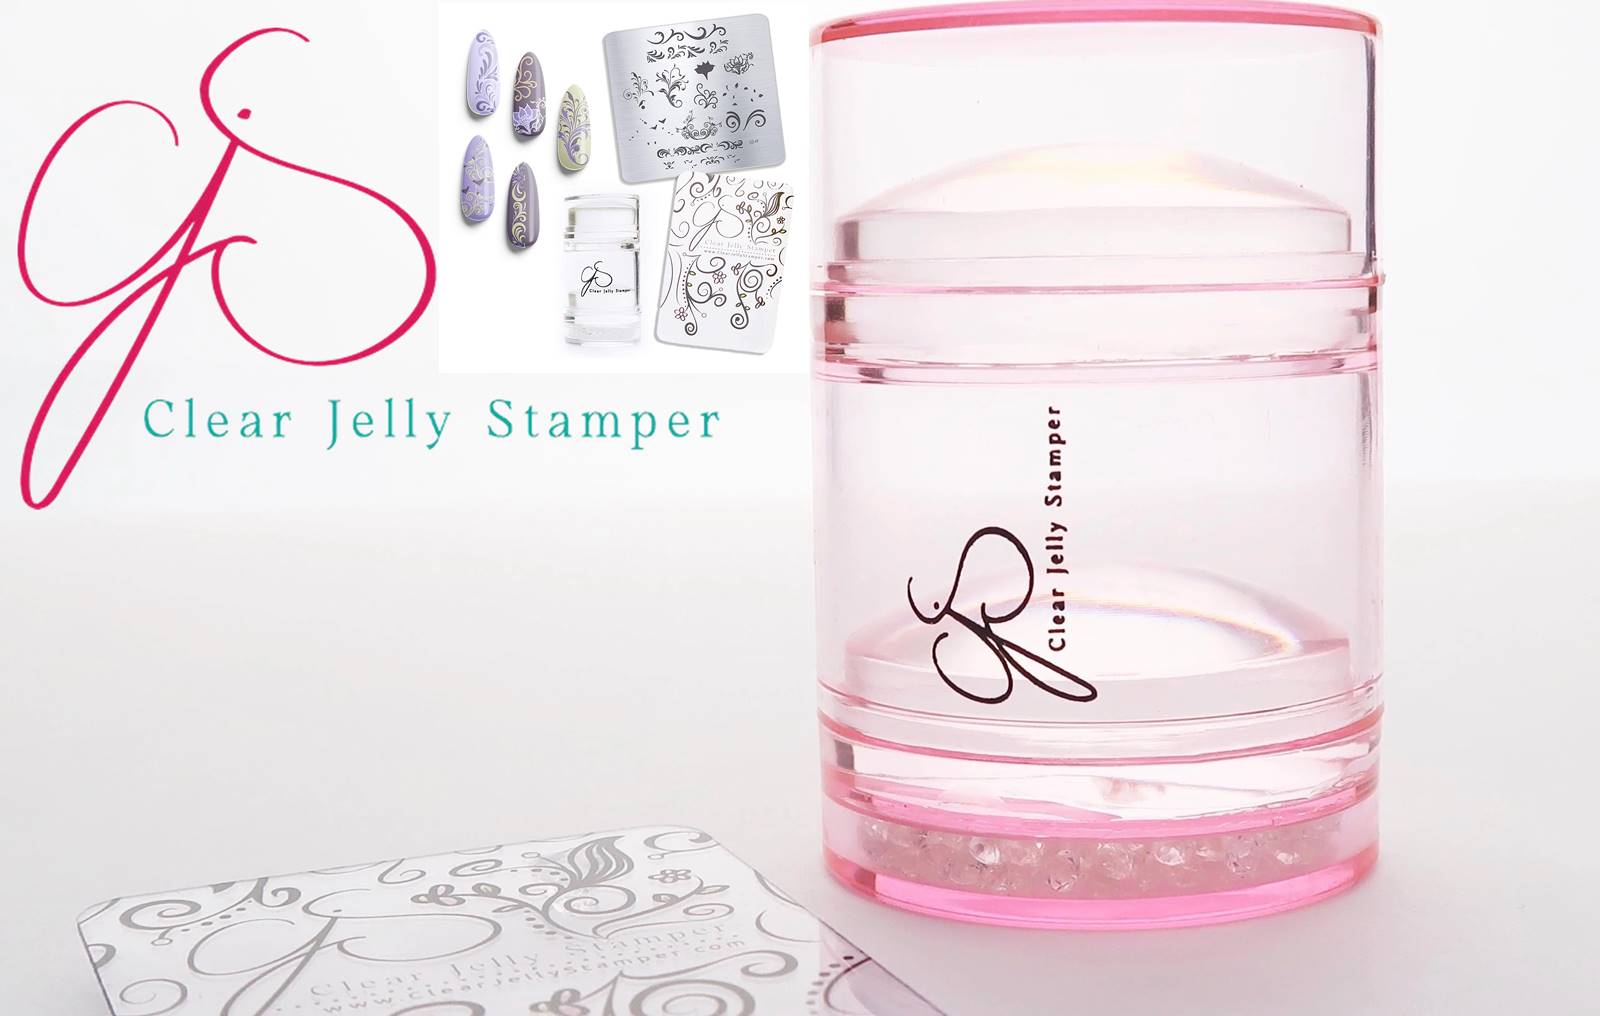 Clear Jelly Stamper - wide 1